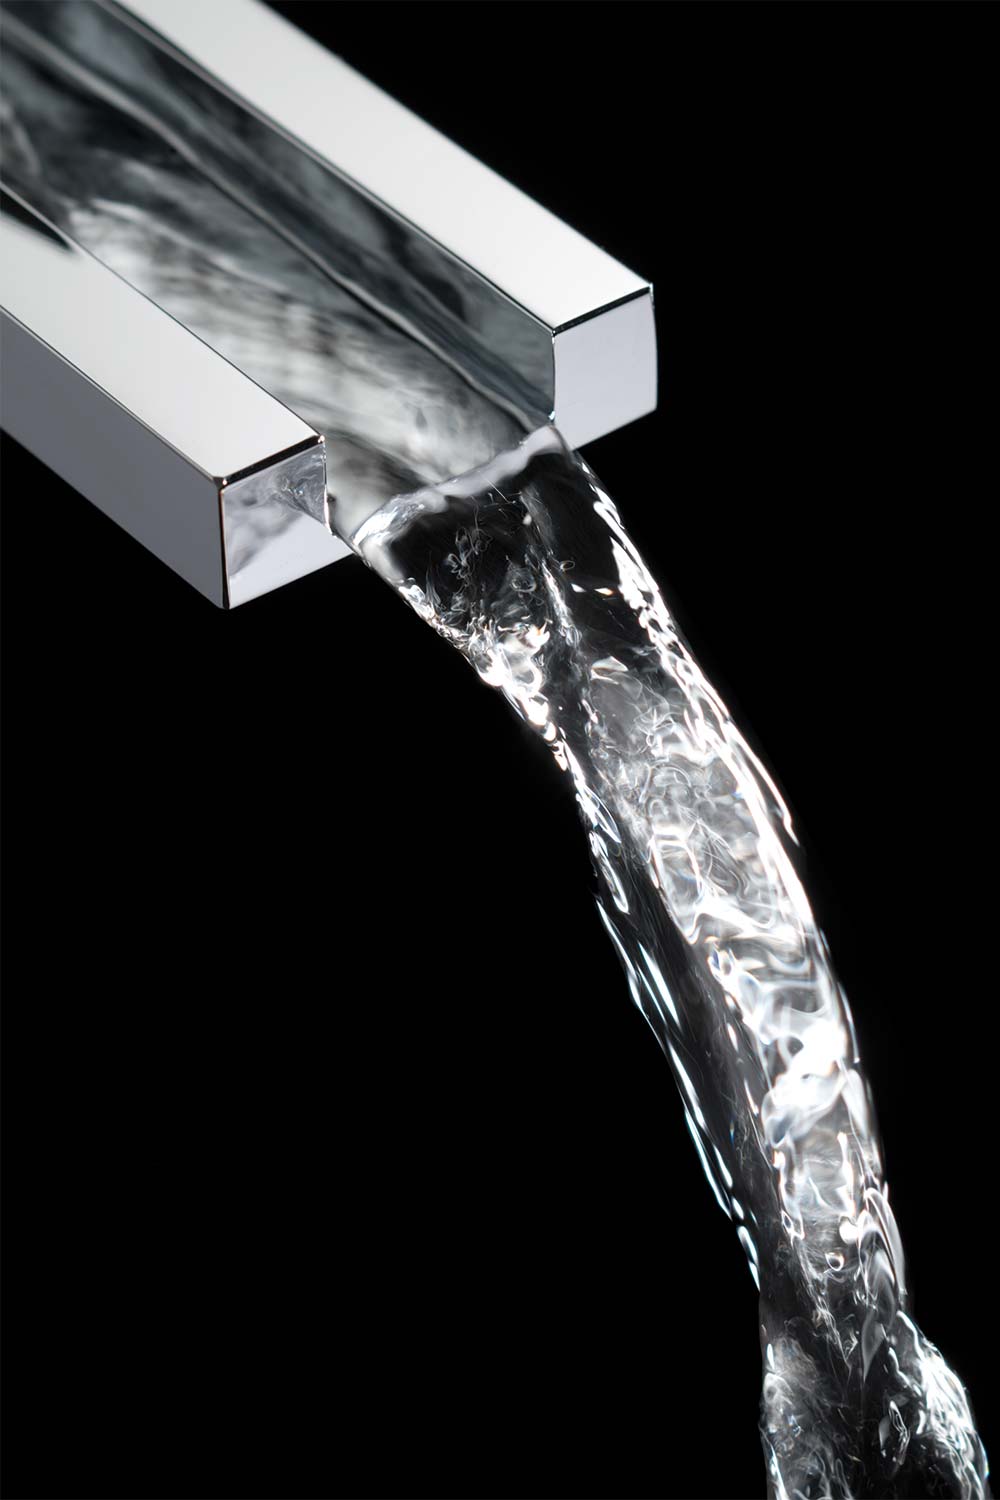 Close up of a waterfall spout with water flowing against a black background